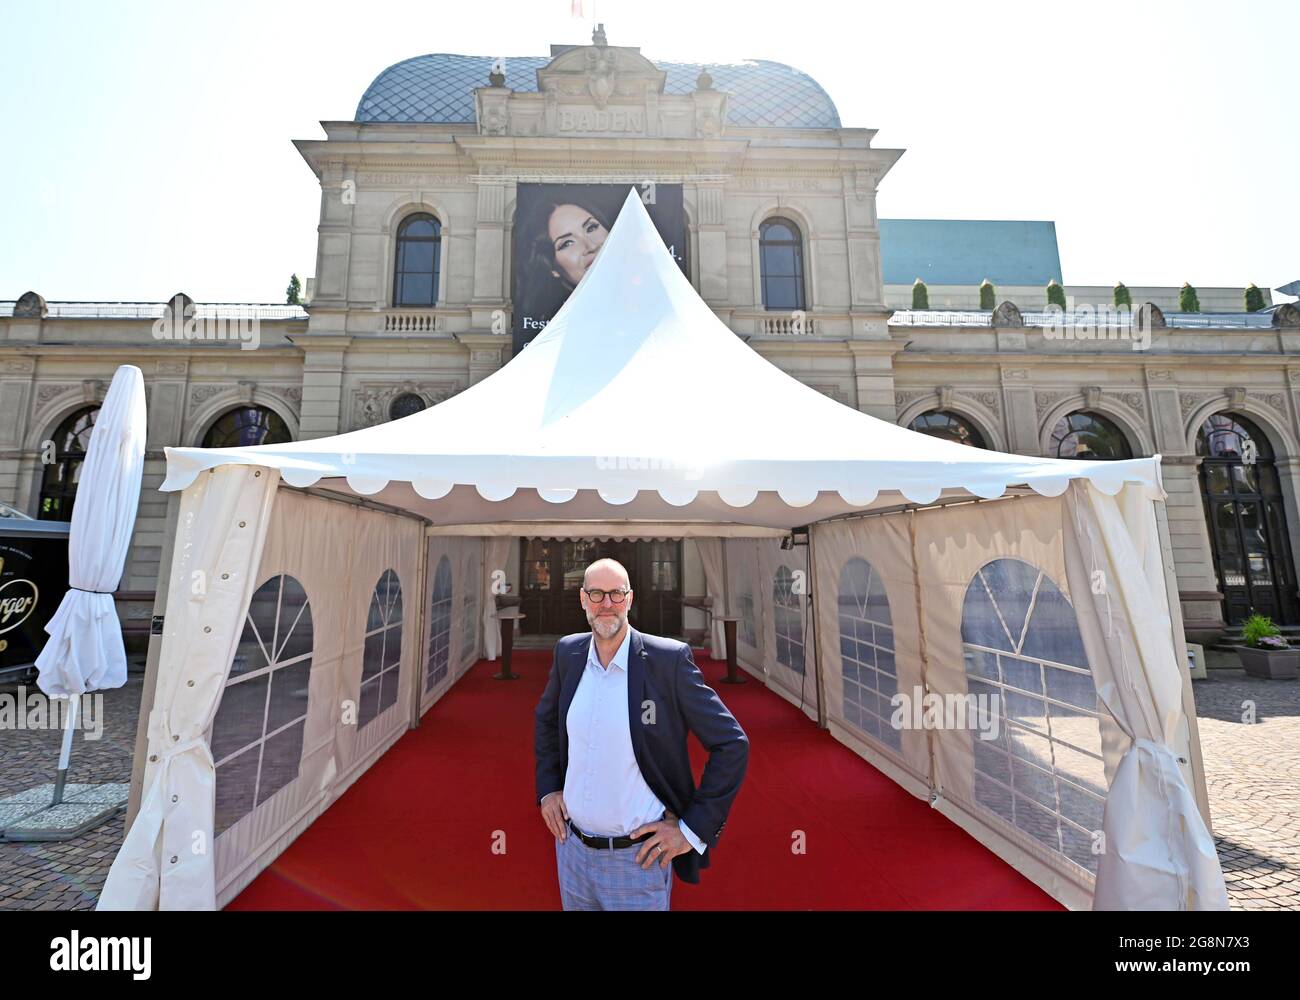 Baden Baden, Germany. 20th July, 2021. Benedikt Stampa, artistic director of the Festspielhaus Baden-Baden, stands in a tent in front of the opera house. To ensure safe distances even on rainy days, the Festspielhaus relies, among other things, on 'flying structures' to protect the audience. As part of a model project of 18 cultural and leisure facilities in Baden-Wuerttemberg, the Festspielhaus is testing the optimal management of visitor flows in times of pandemic. (to dpa-Korr 'Between frustration and euphoria: Festival bosses test what works') Credit: Uli Deck/dpa/Alamy Live News Stock Photo